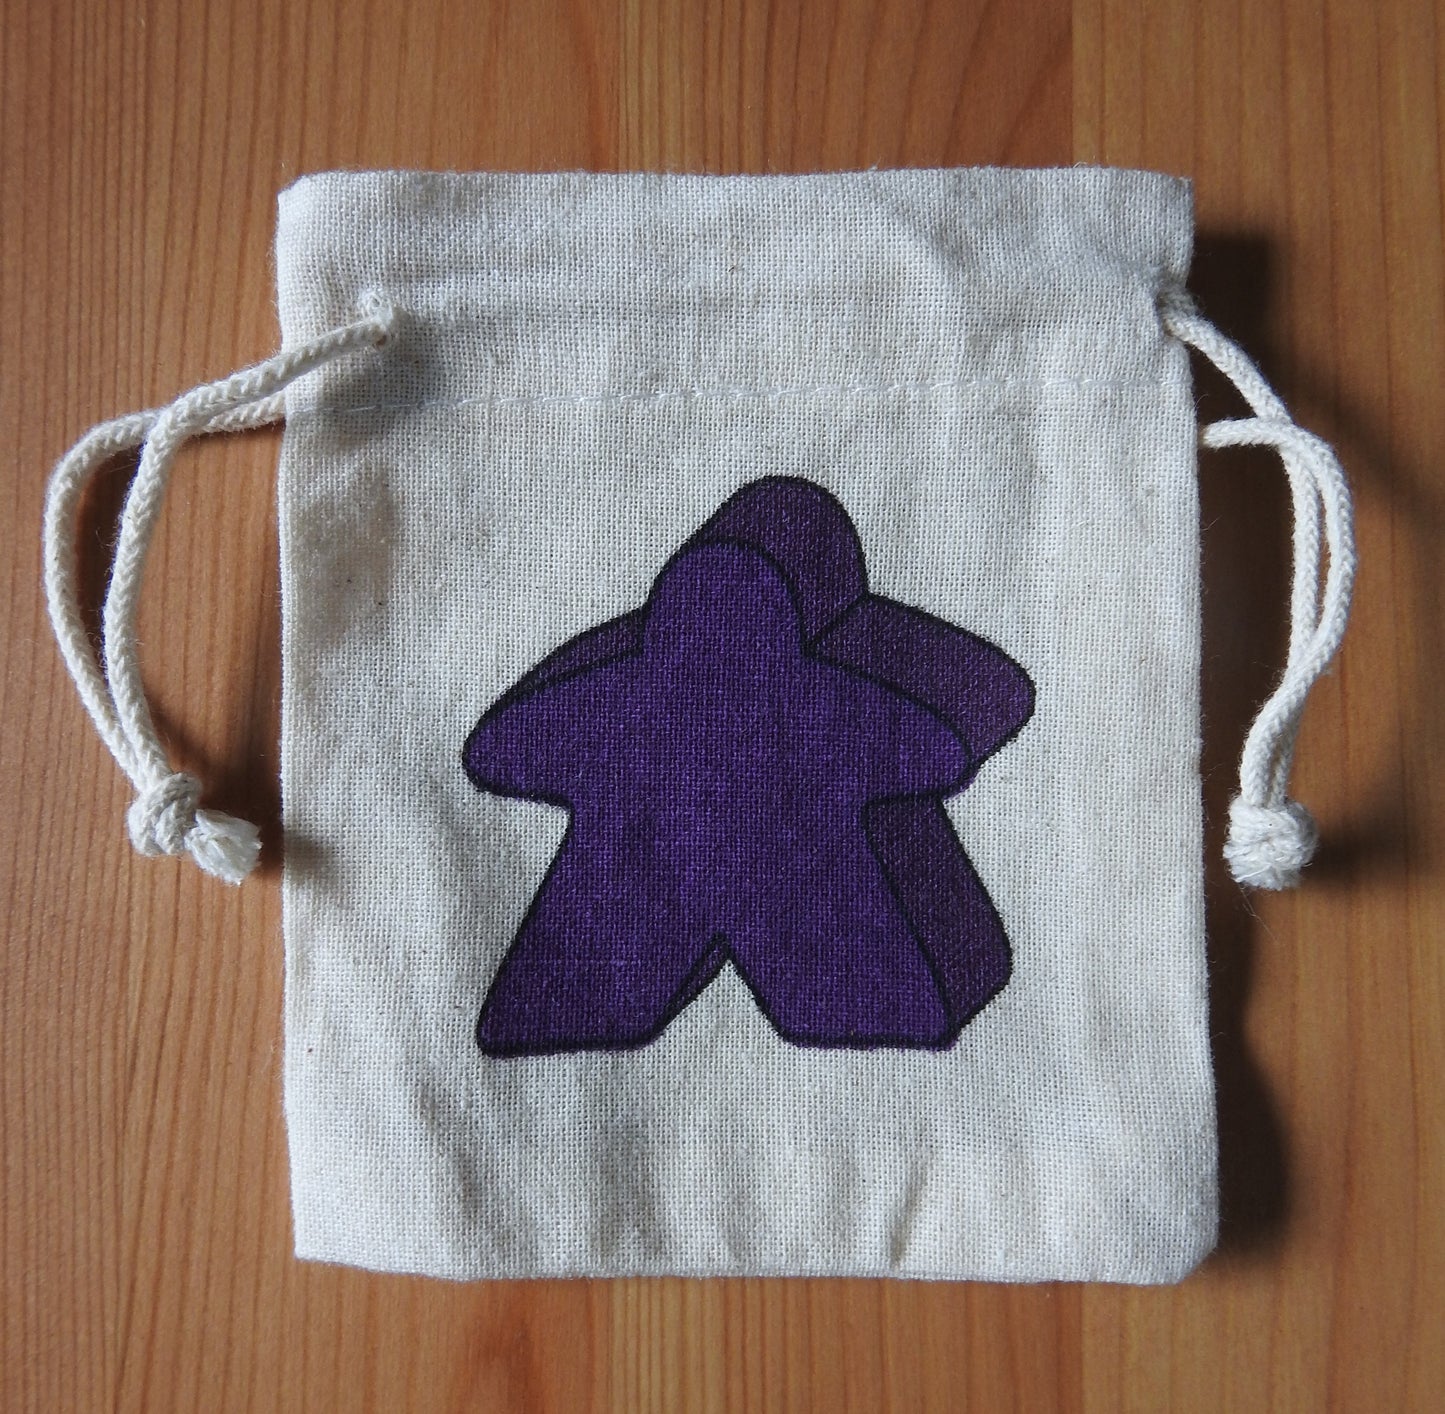 Close-up of the purple meeple bag.